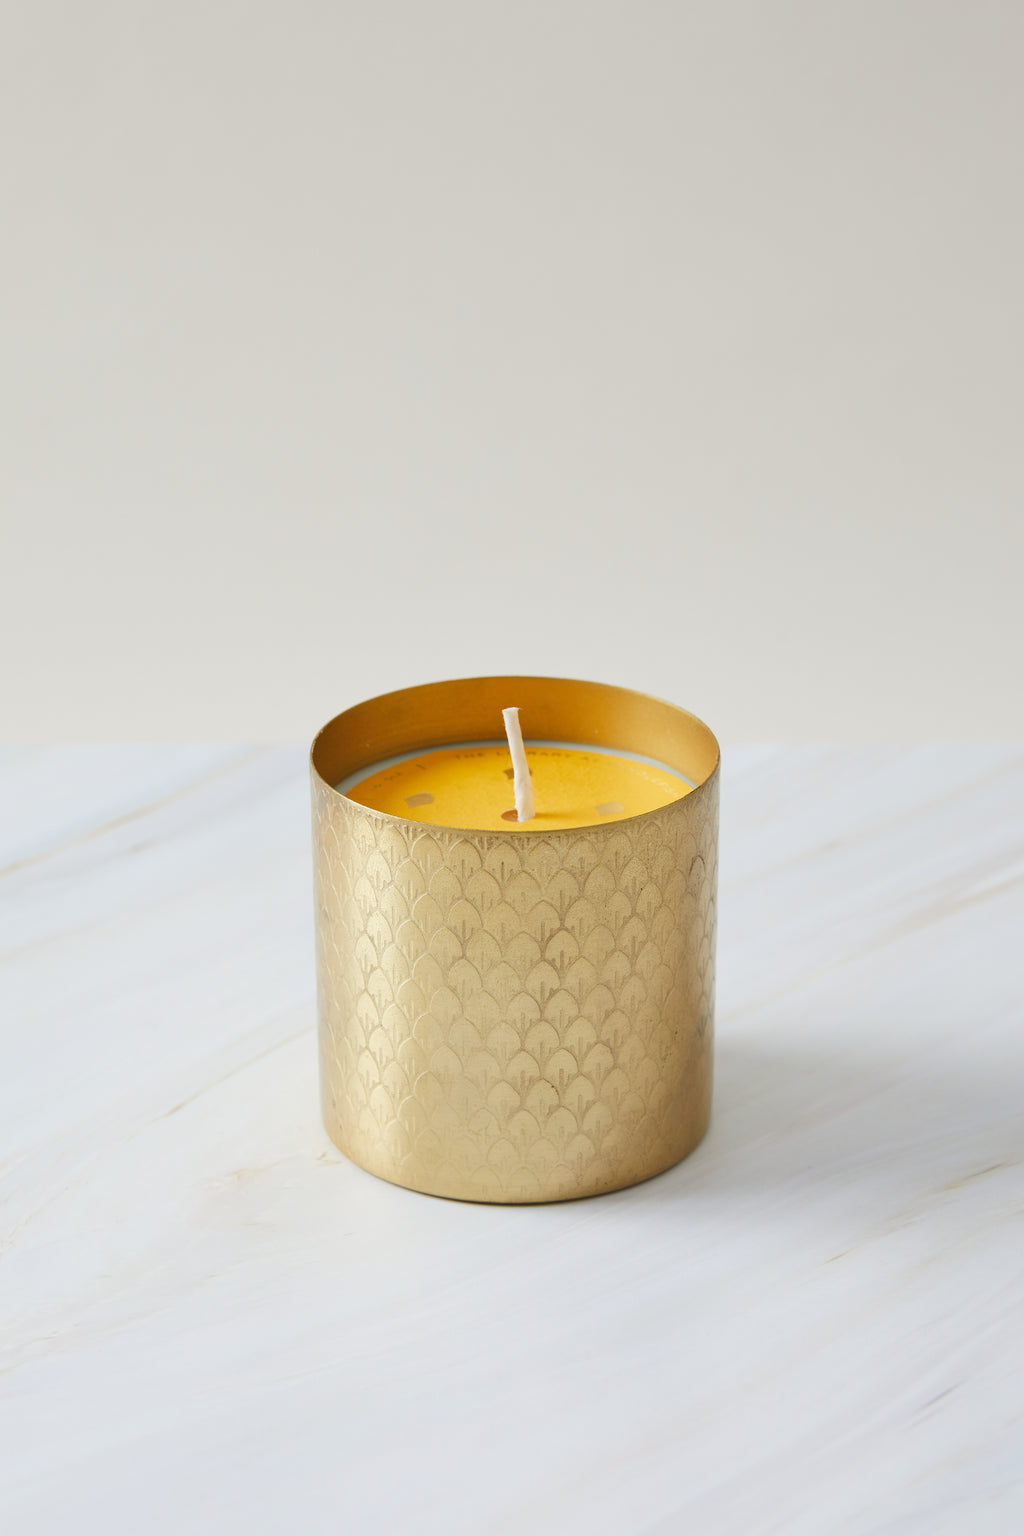 No. 12 Engraved Scales Candle 9 oz - Yellow